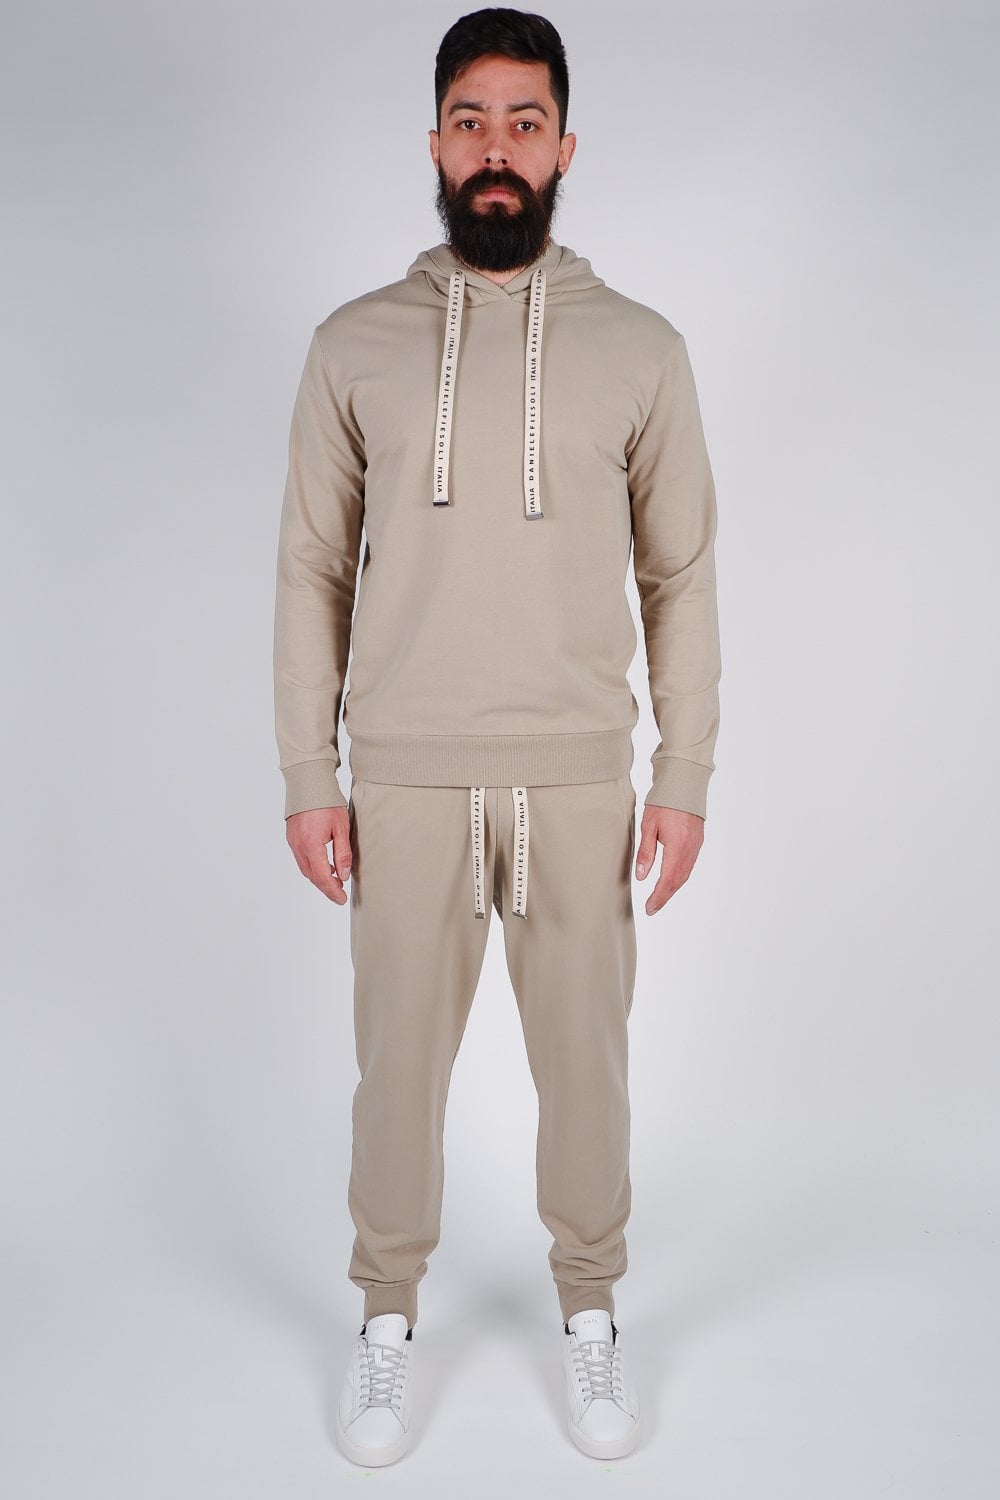 Buy the Daniele Fiesoli Jersey Joggers in Taupe at Intro. Spend £50 for free UK delivery. Official stockists. We ship worldwide.